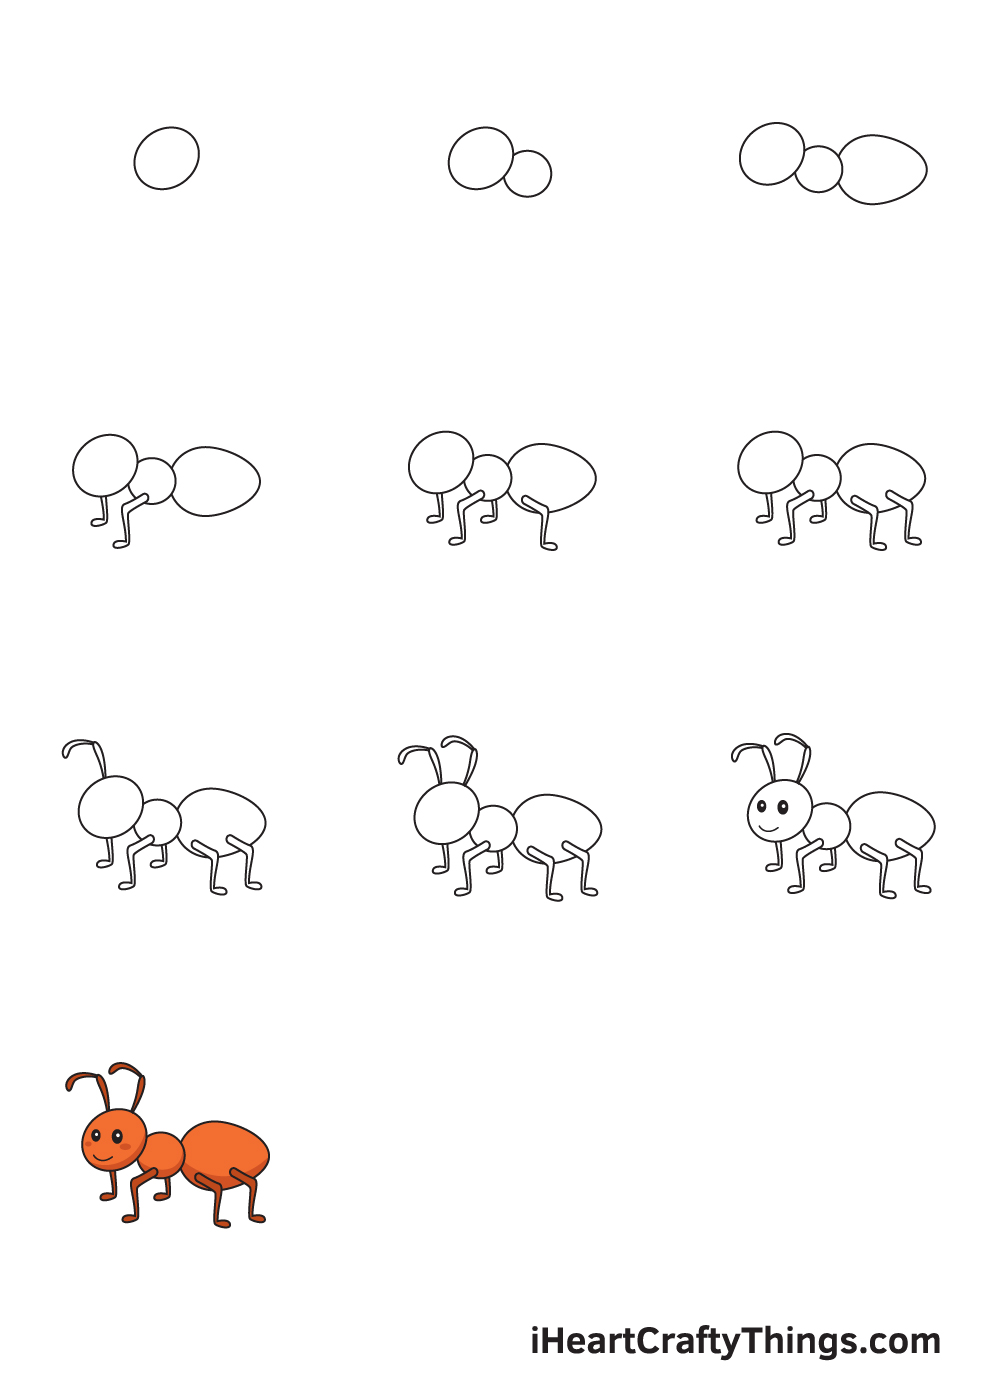 drawing ant in 9 steps